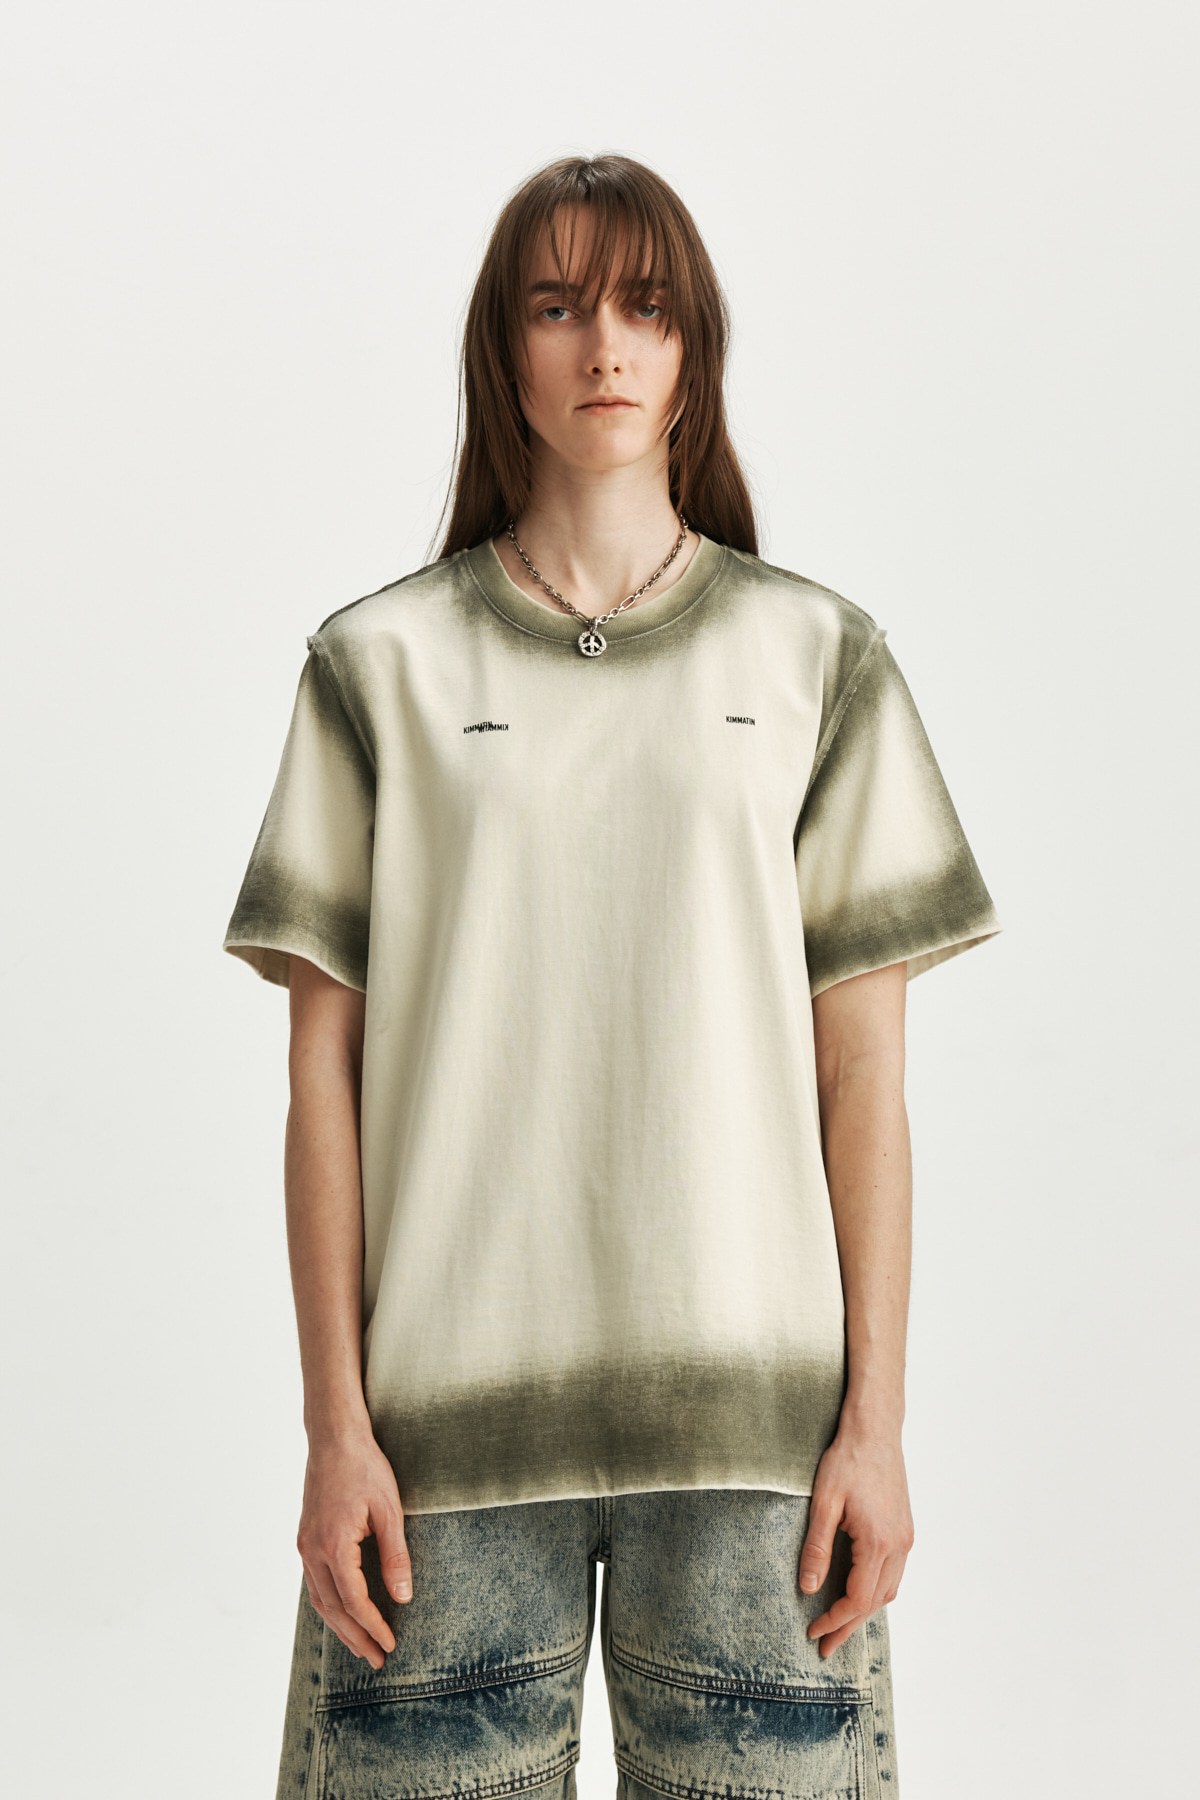 SMALL LOGO DYING TOP IN BEIGE